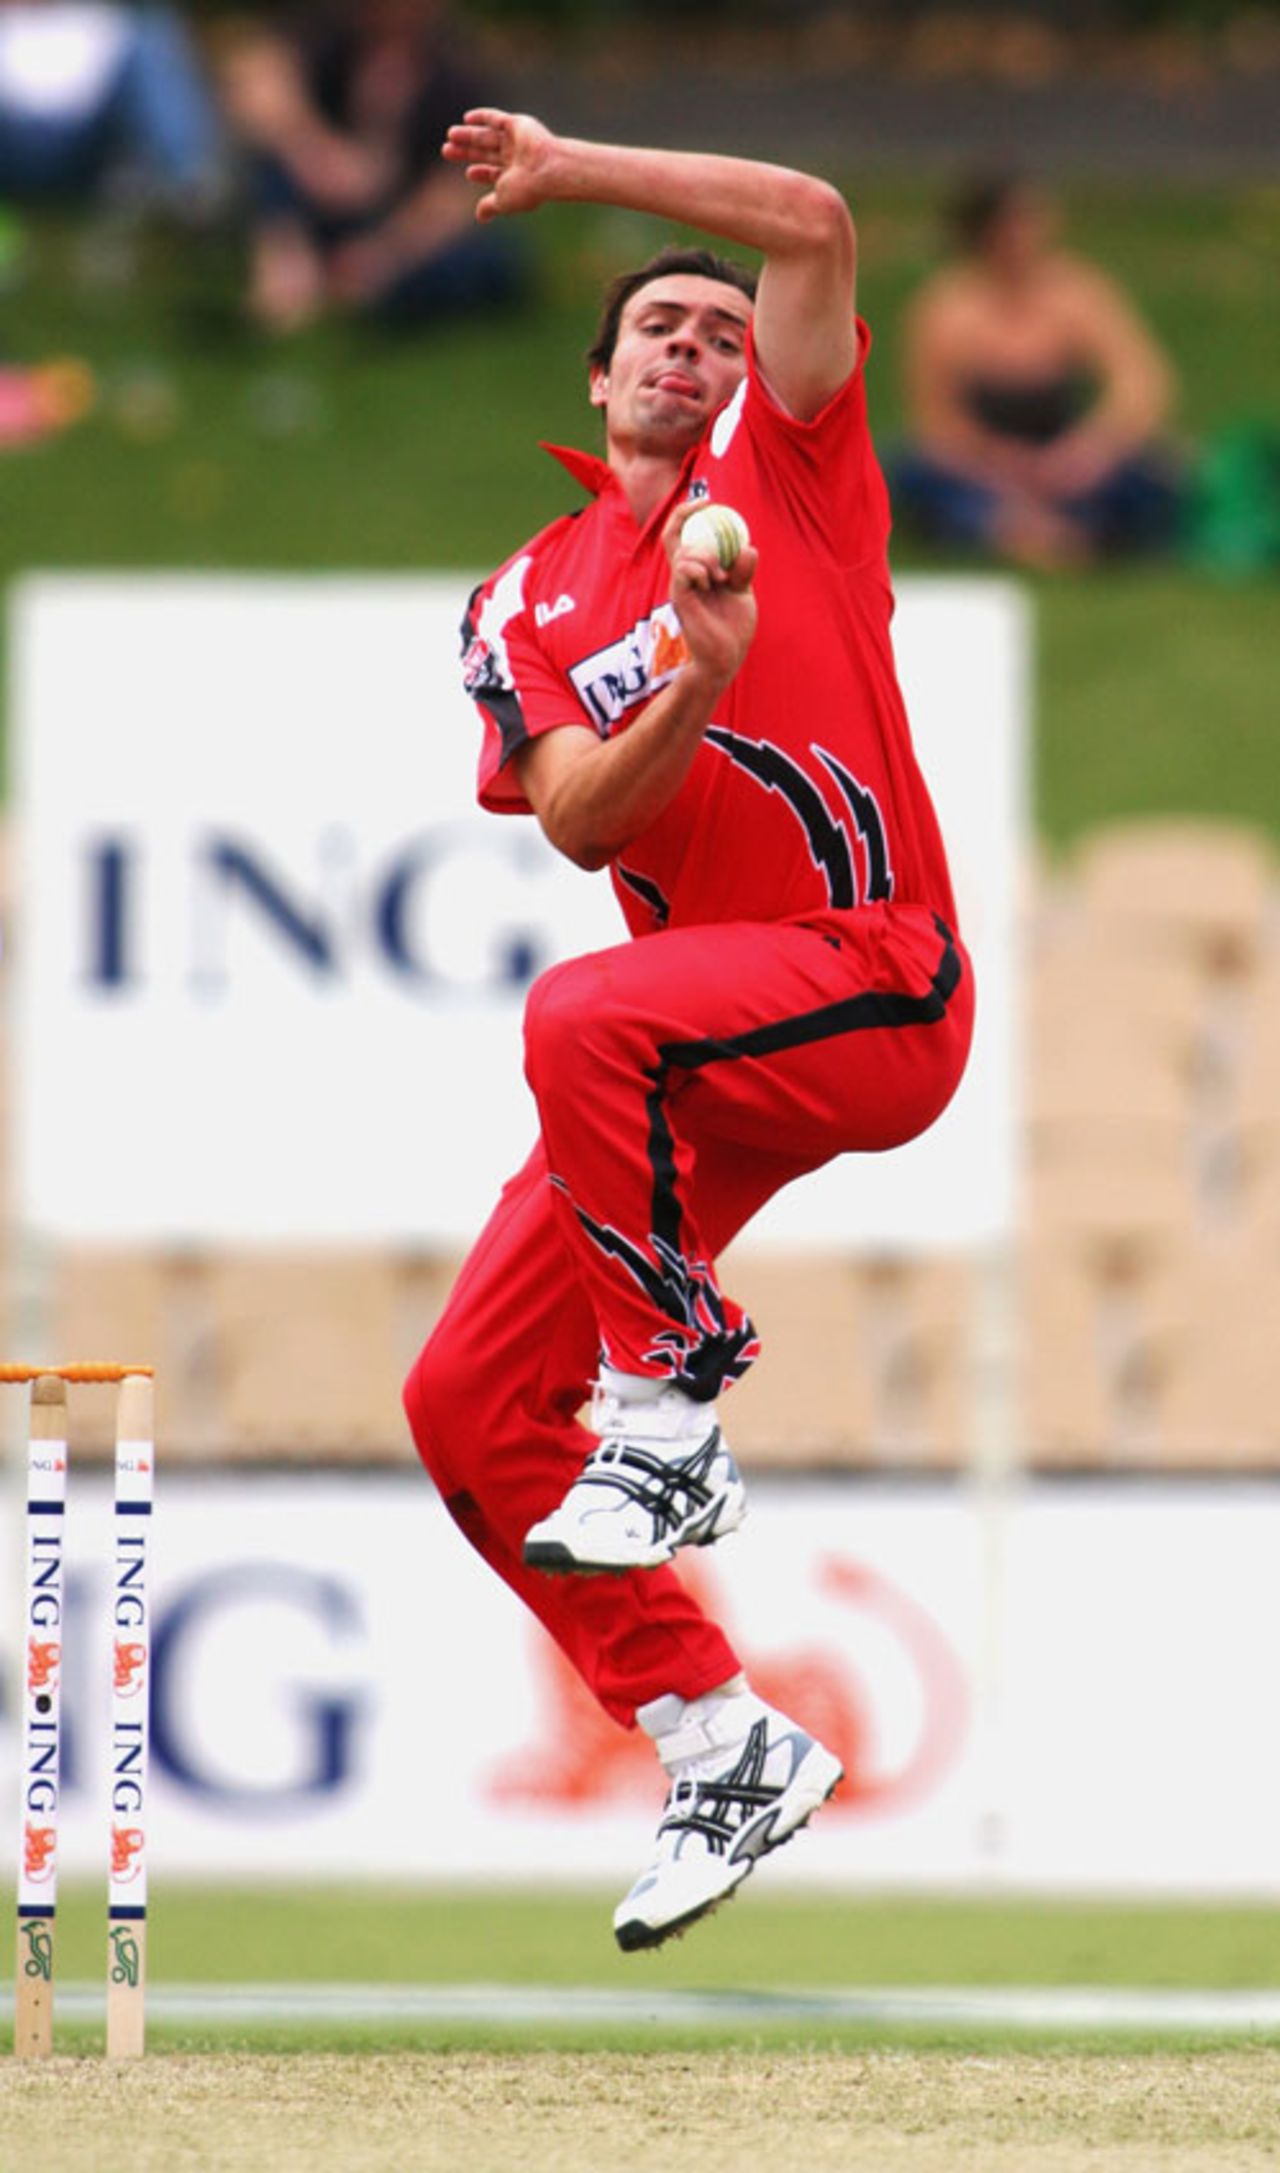 Matthew Weeks bowls in the ING Cup match between the South Australia and Victoria at Adelaide Oval October 30, 2004